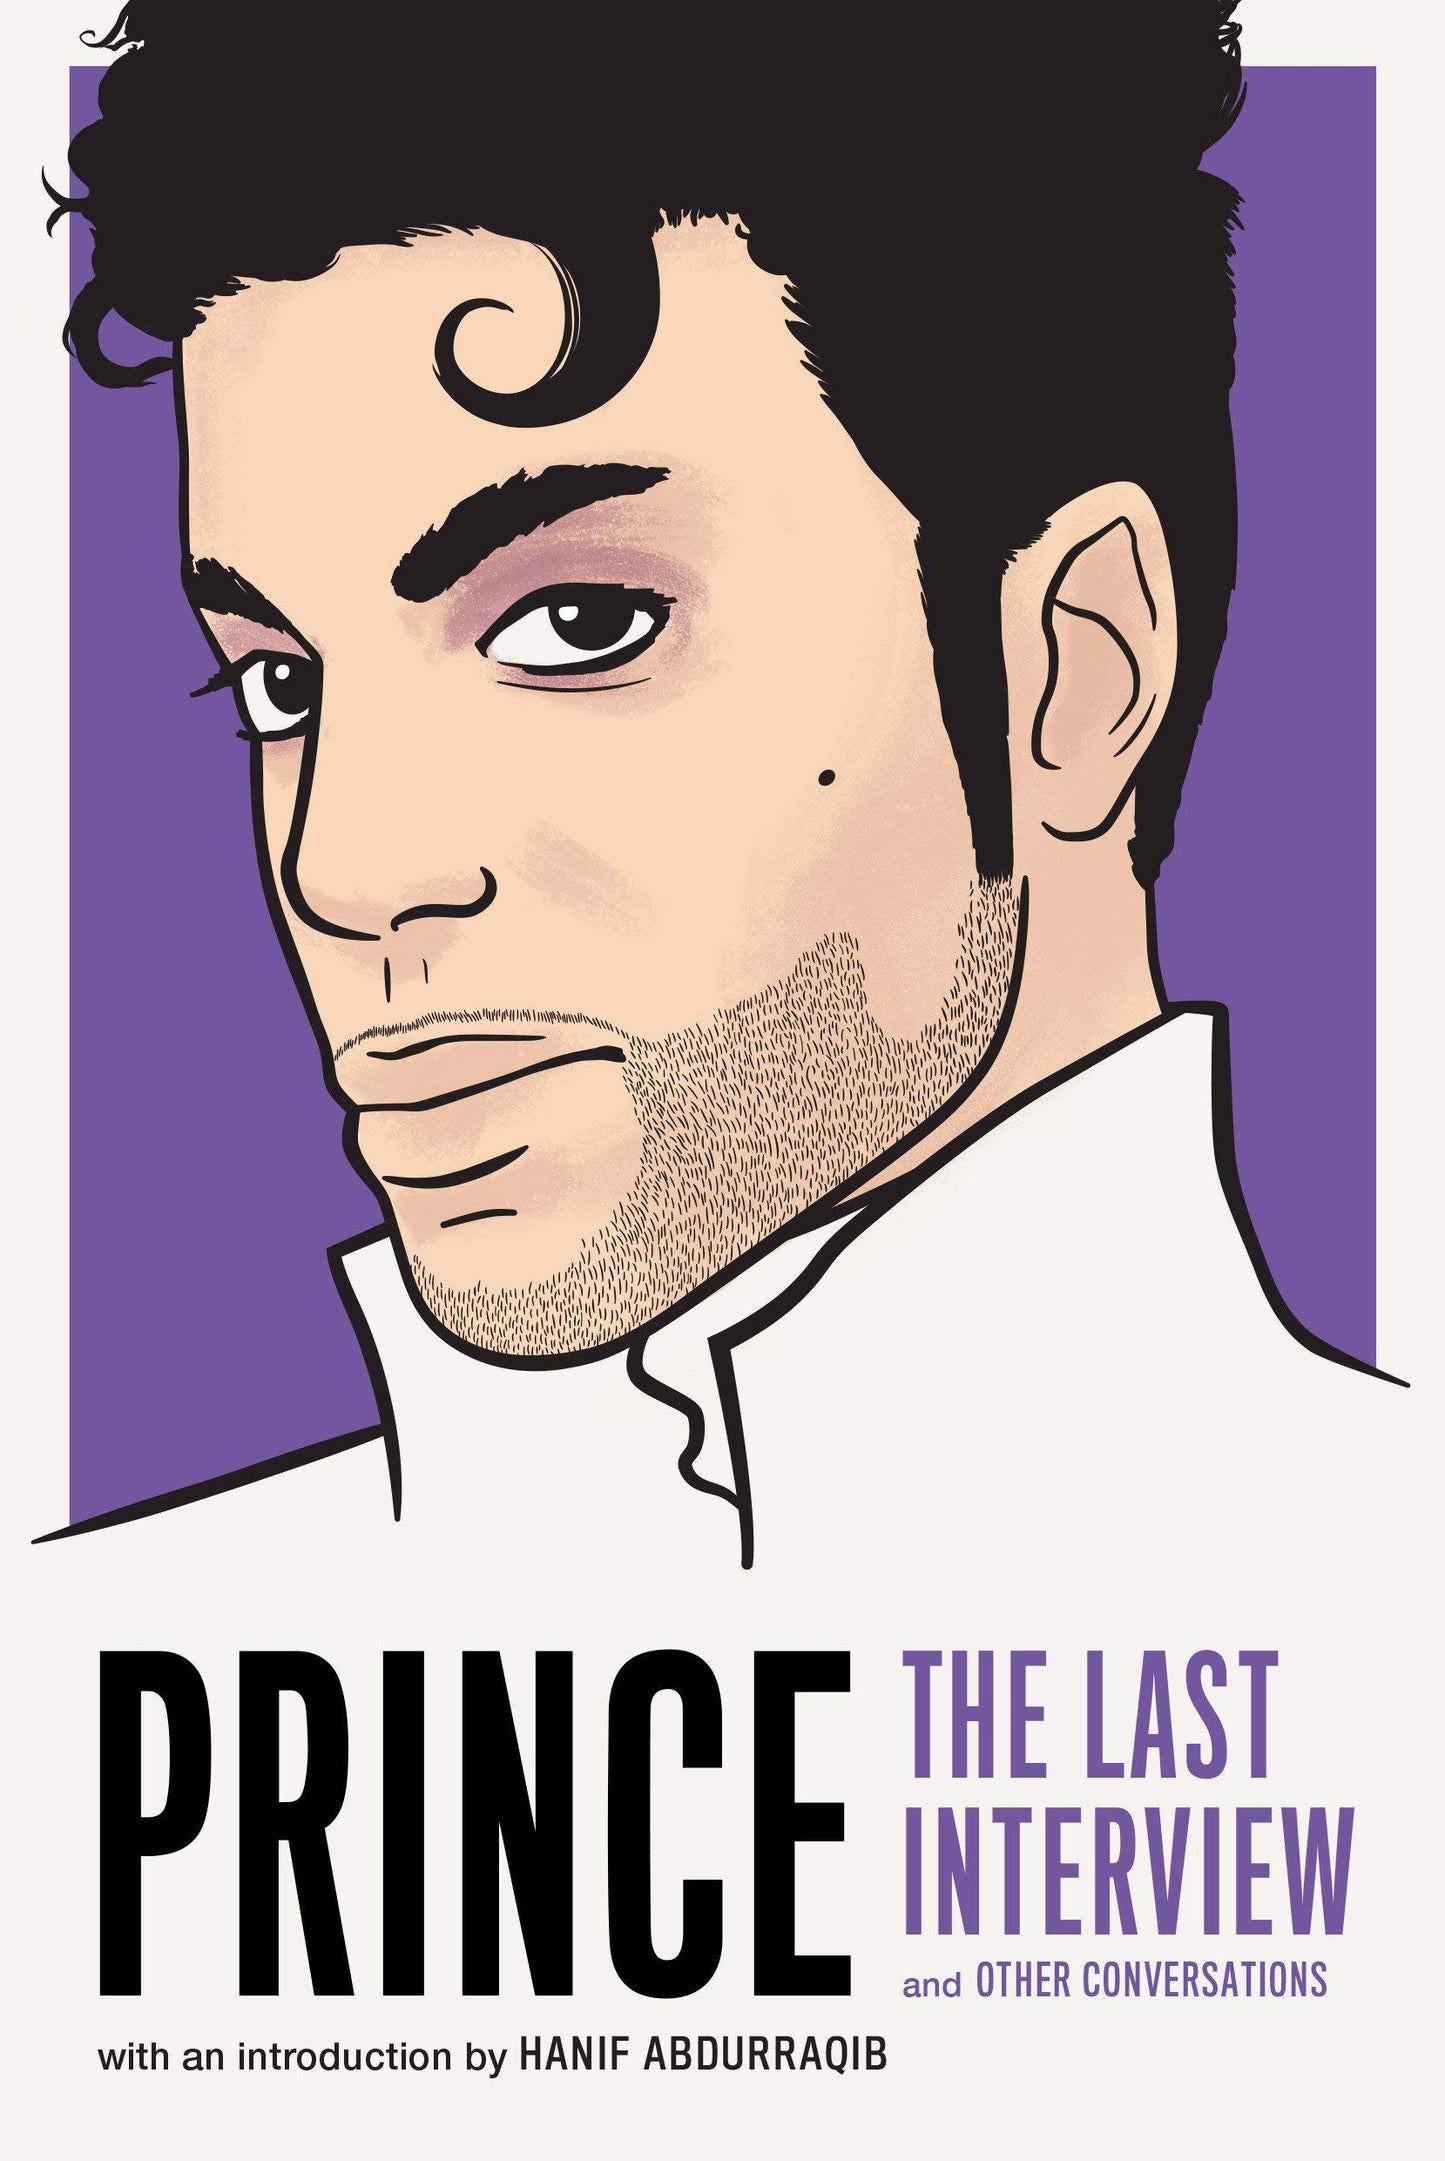 Prince // The Last Interview